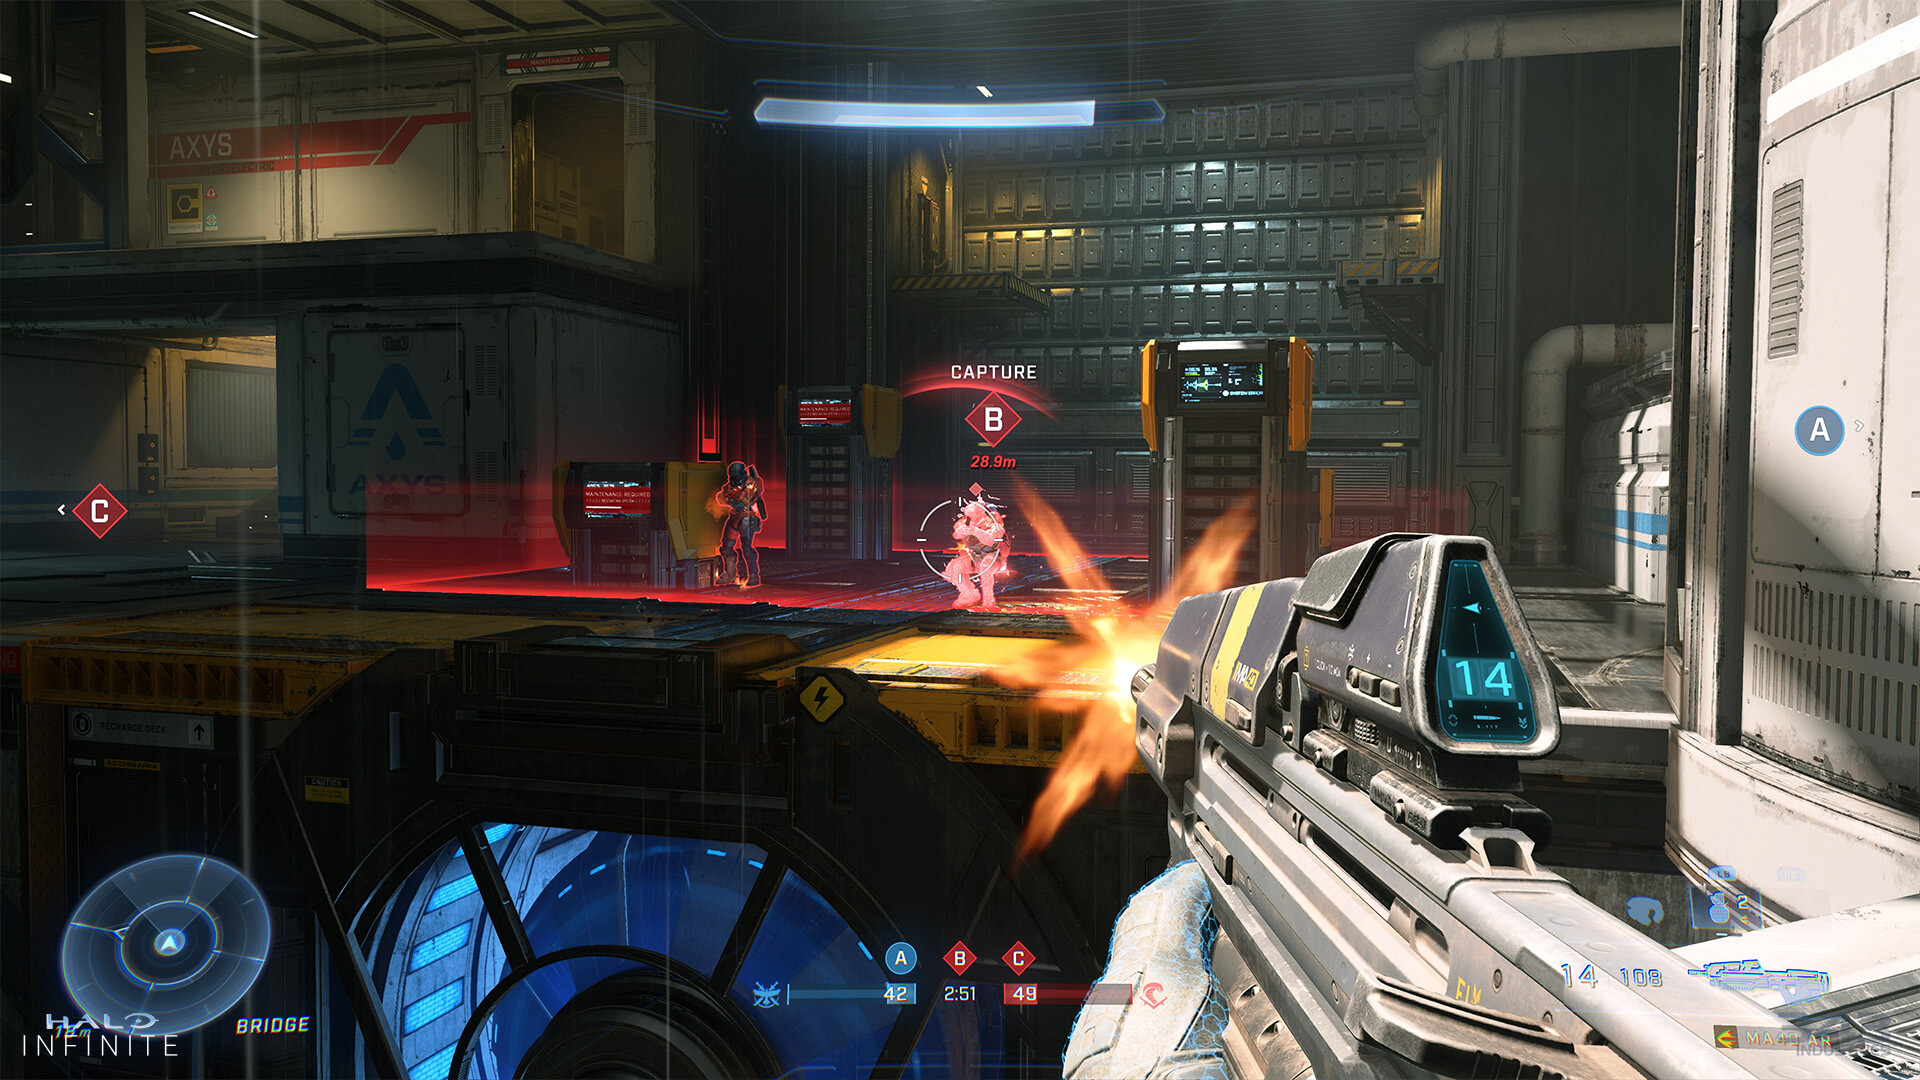 Halo Online Is a Free-to-Play PC Shooter Coming Only to Russia